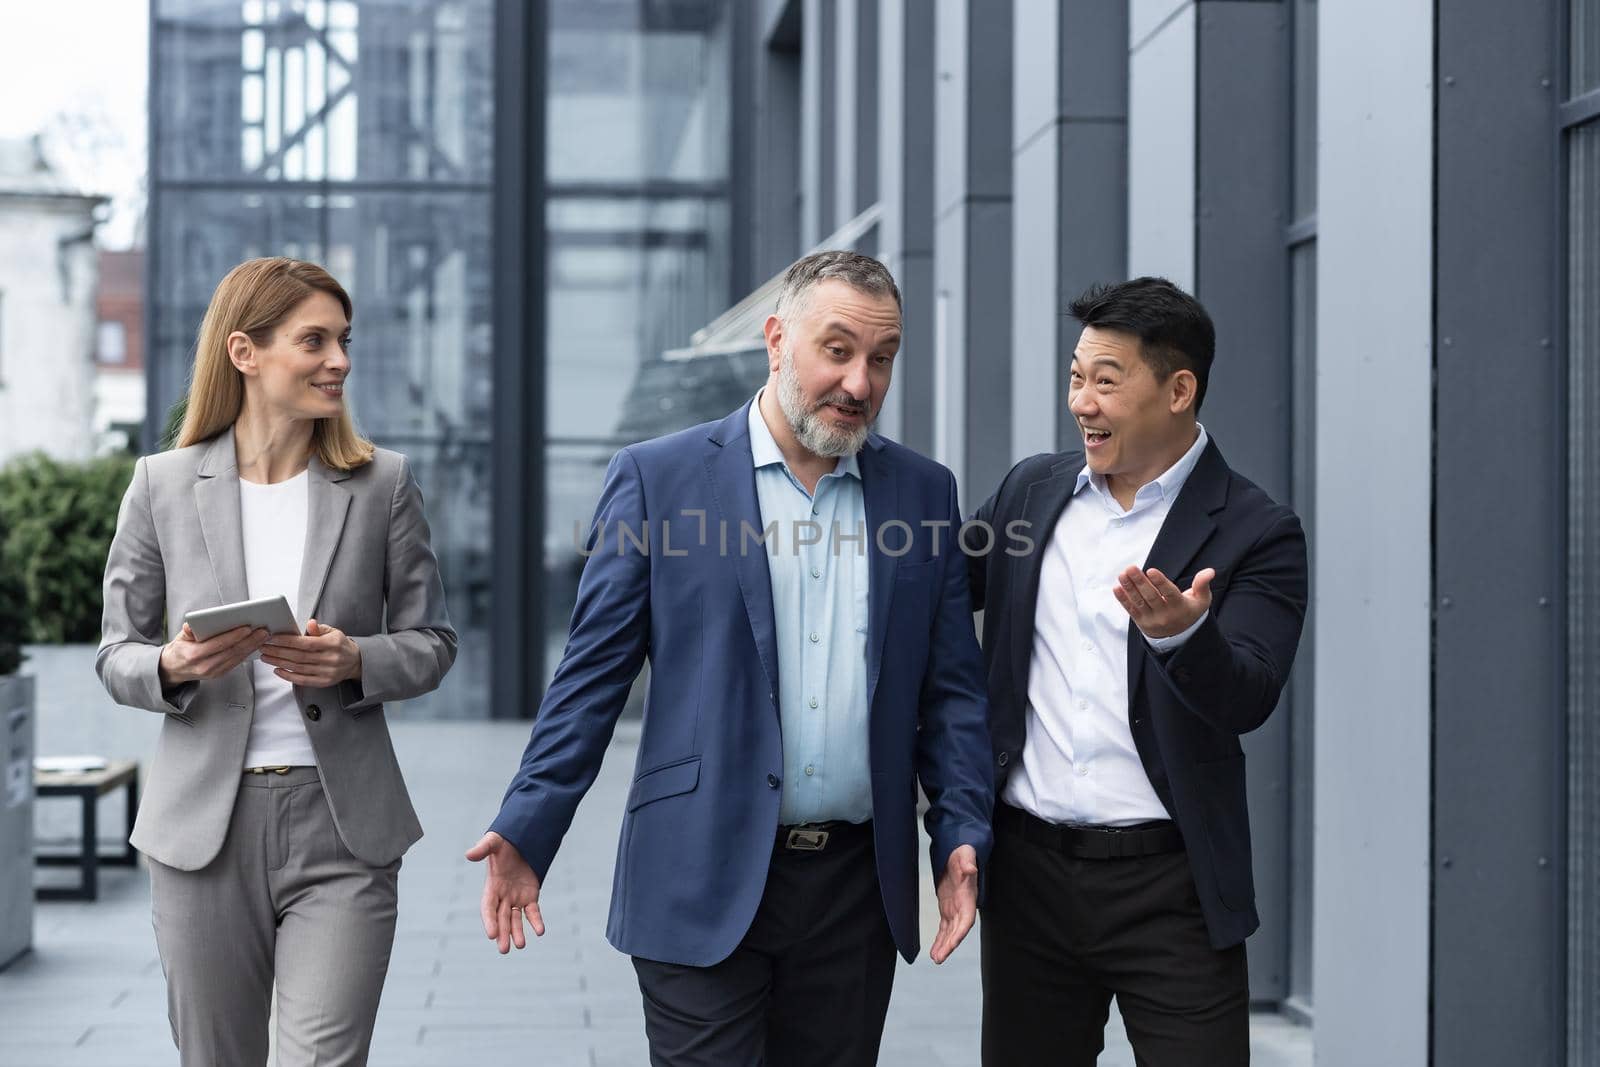 A diverse team of IT specialists, senior and experienced engineers managers team leaders, a group of three workers happily strolling outside an office building, colleagues in business suits by voronaman